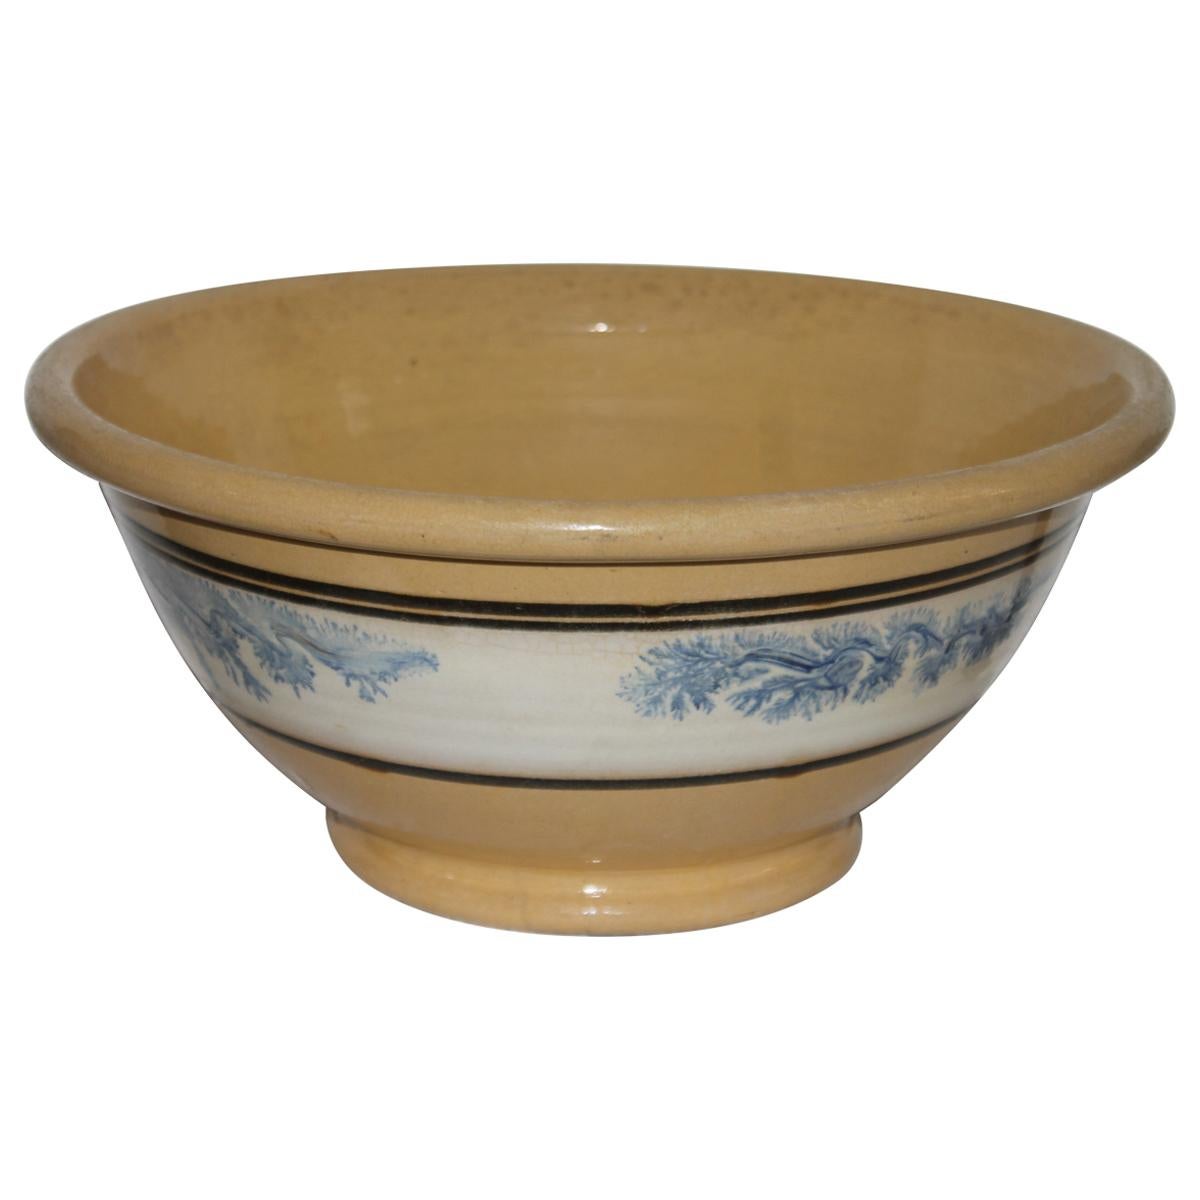 19th Century Monumental Mocha Yellow Ware Mixing Bowl For Sale